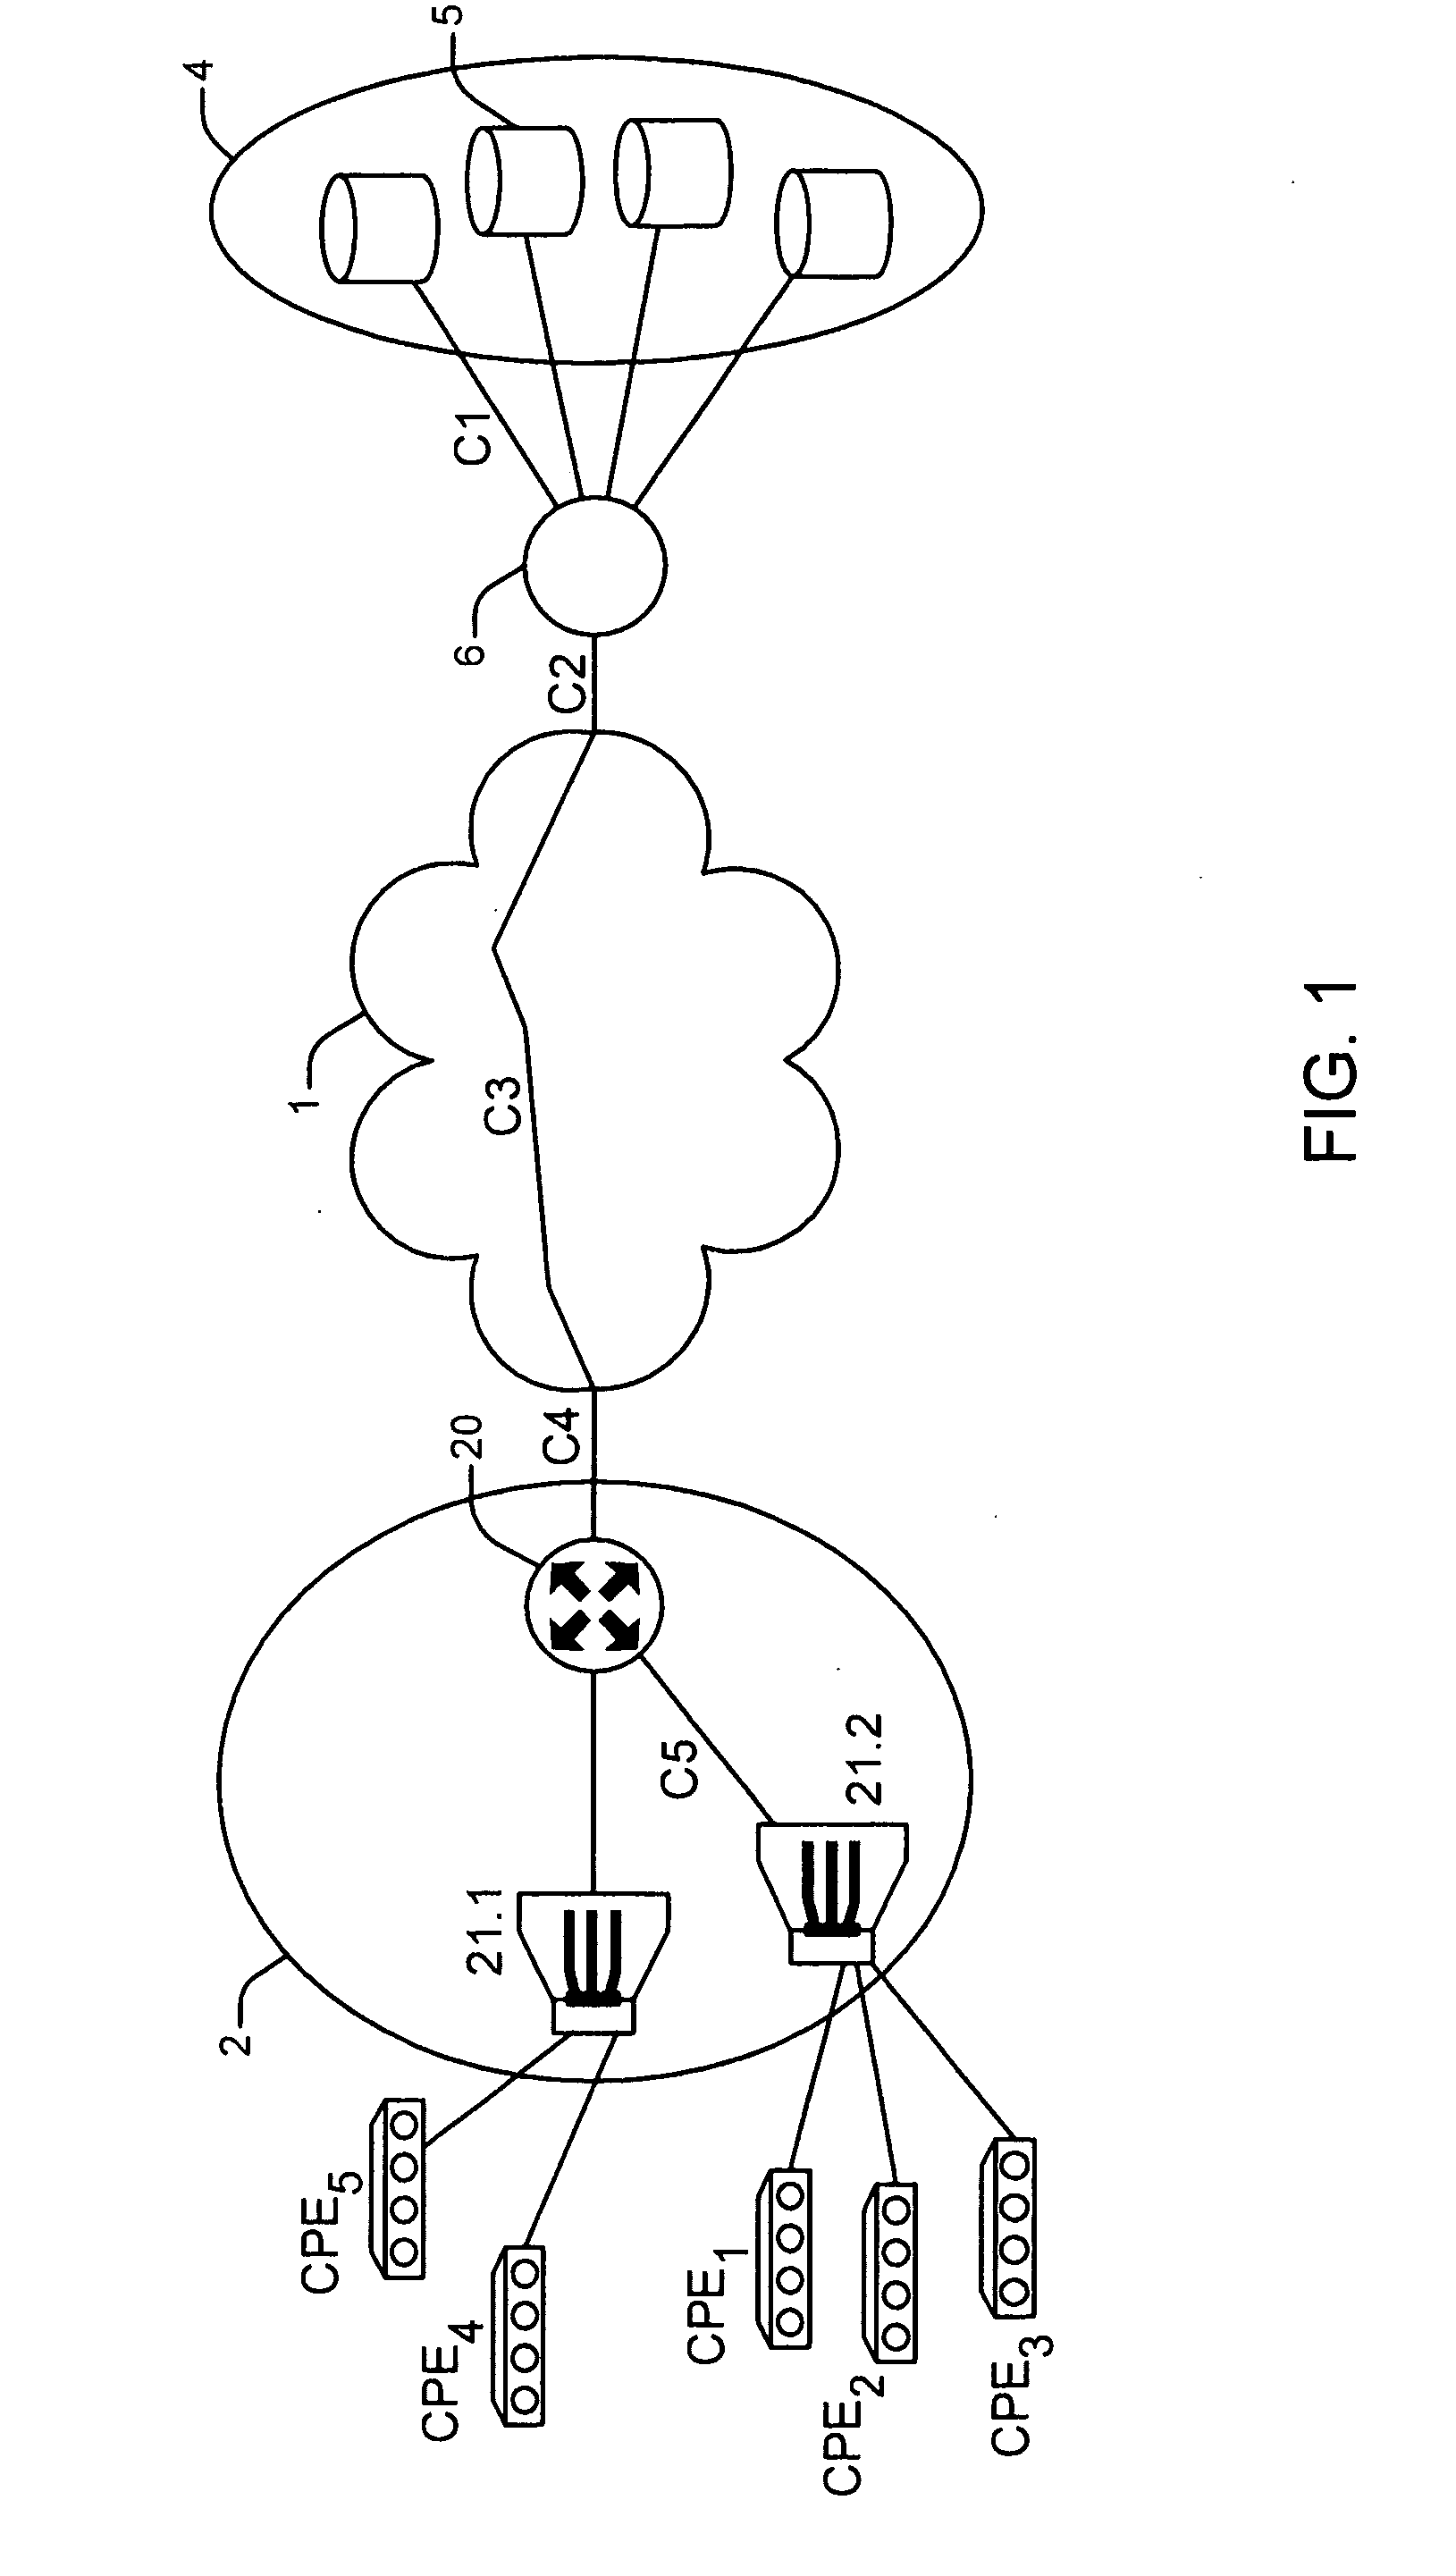 Method of managing requests for remote access to multimedia contents